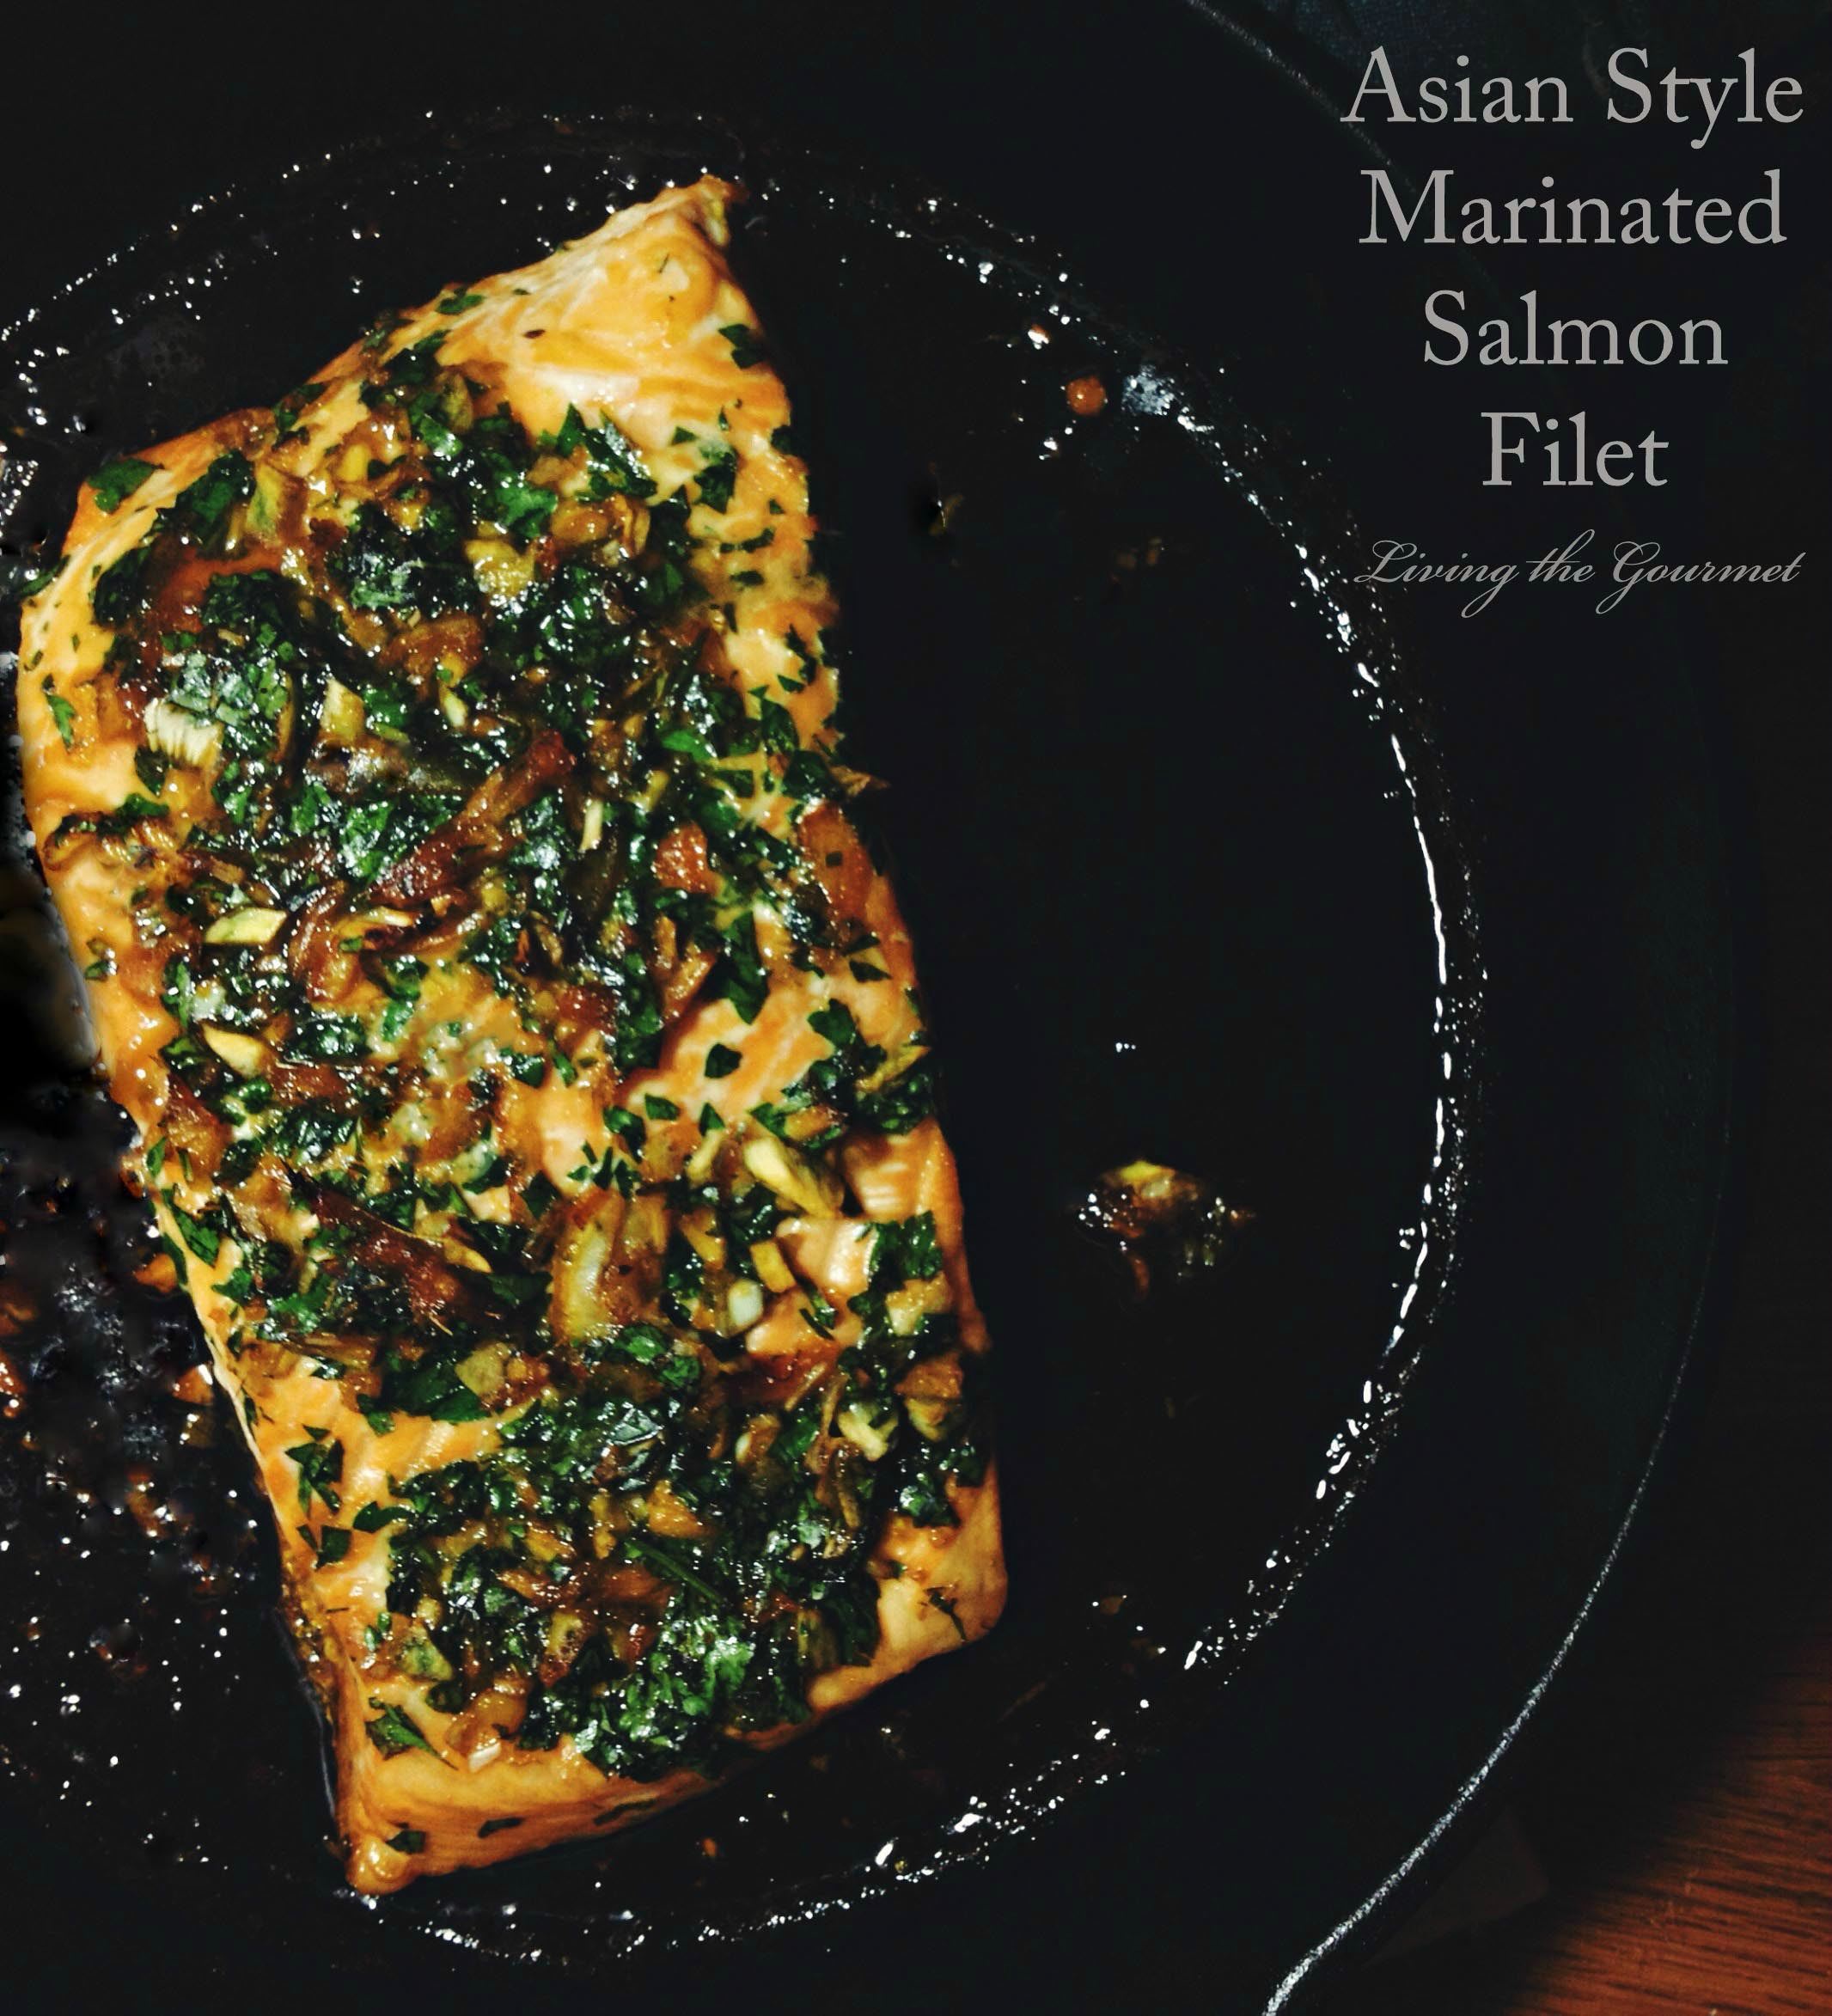 Living the Gourmet: Asian Style Marinated Salmon Filet